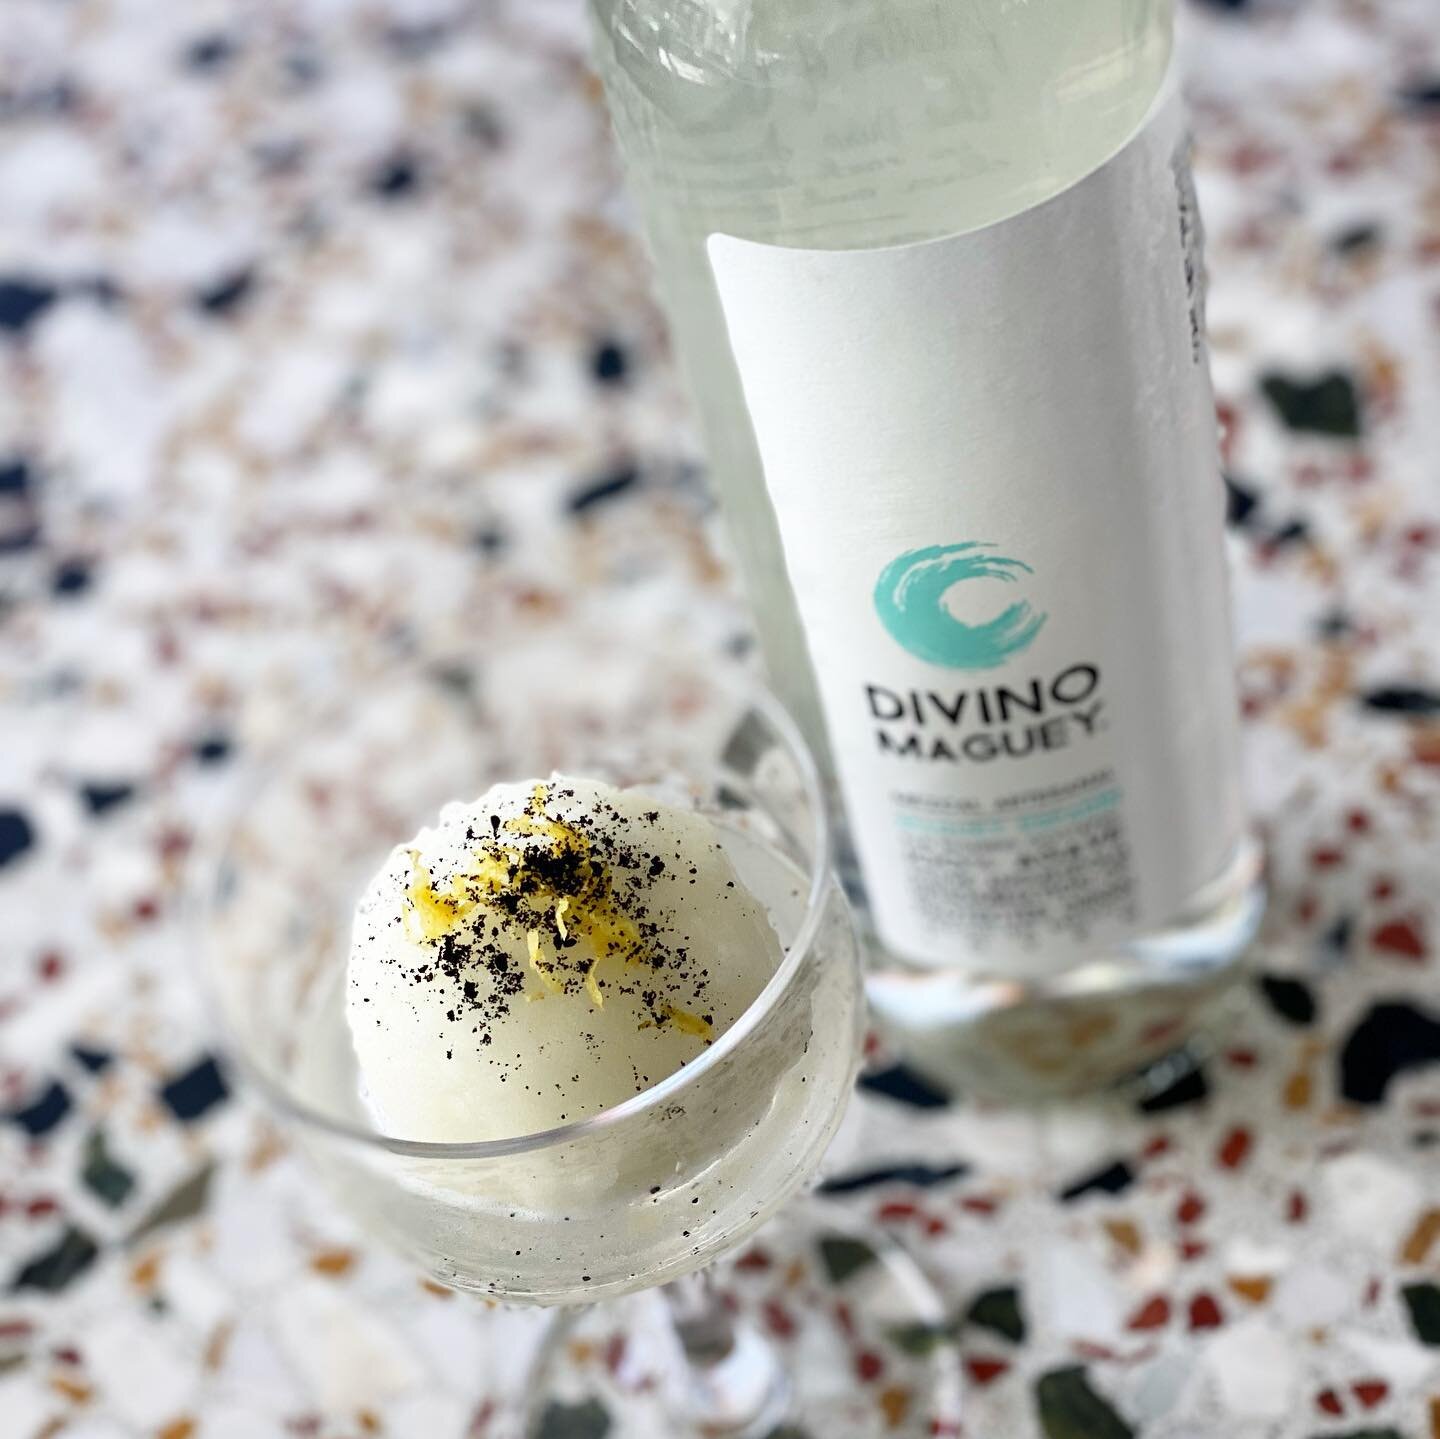 We call it Mezcal Nieve! A mezcal infused sorbet with a hint of lemon.

Want to create a nieve cocktail? Add a shot of your favorite LOLA 55 tequila or mezcal🫶 

#tacosandcocktails #lola55 #lola55sandiego #mezcalcocktails #mezcalnieve #sddrinks